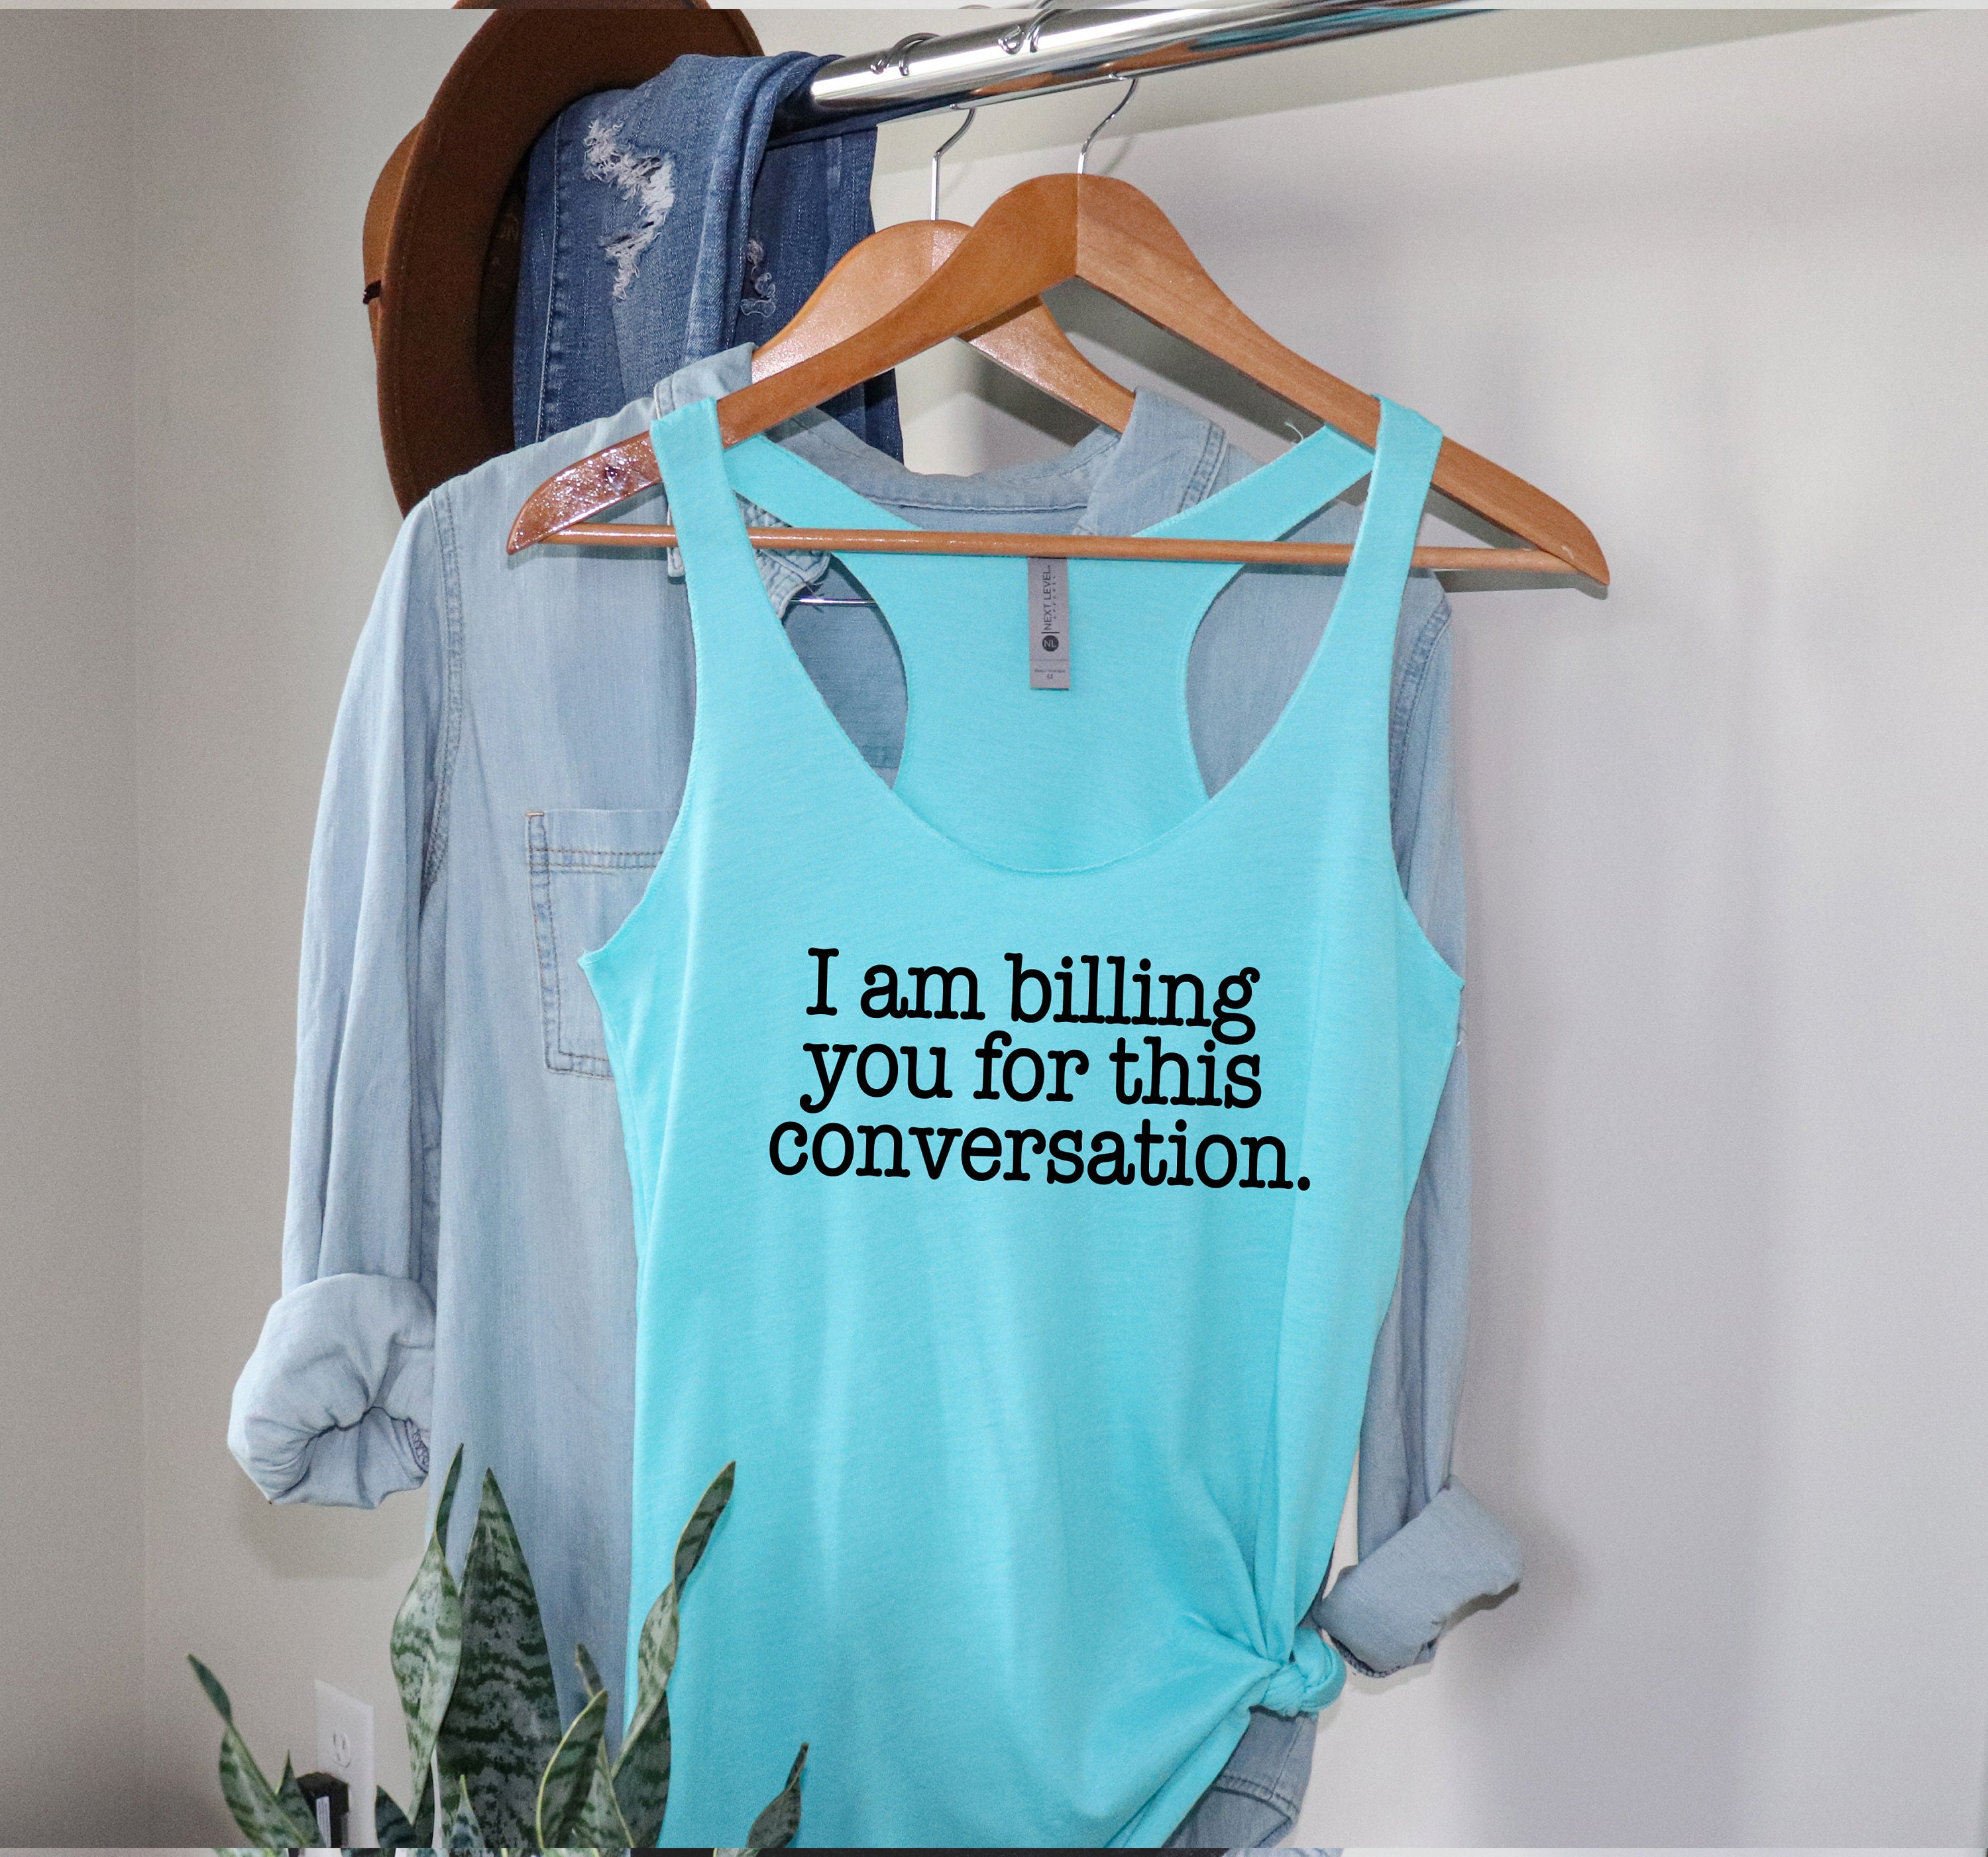 “I Am Billing You for This Conversation” Tank Top 